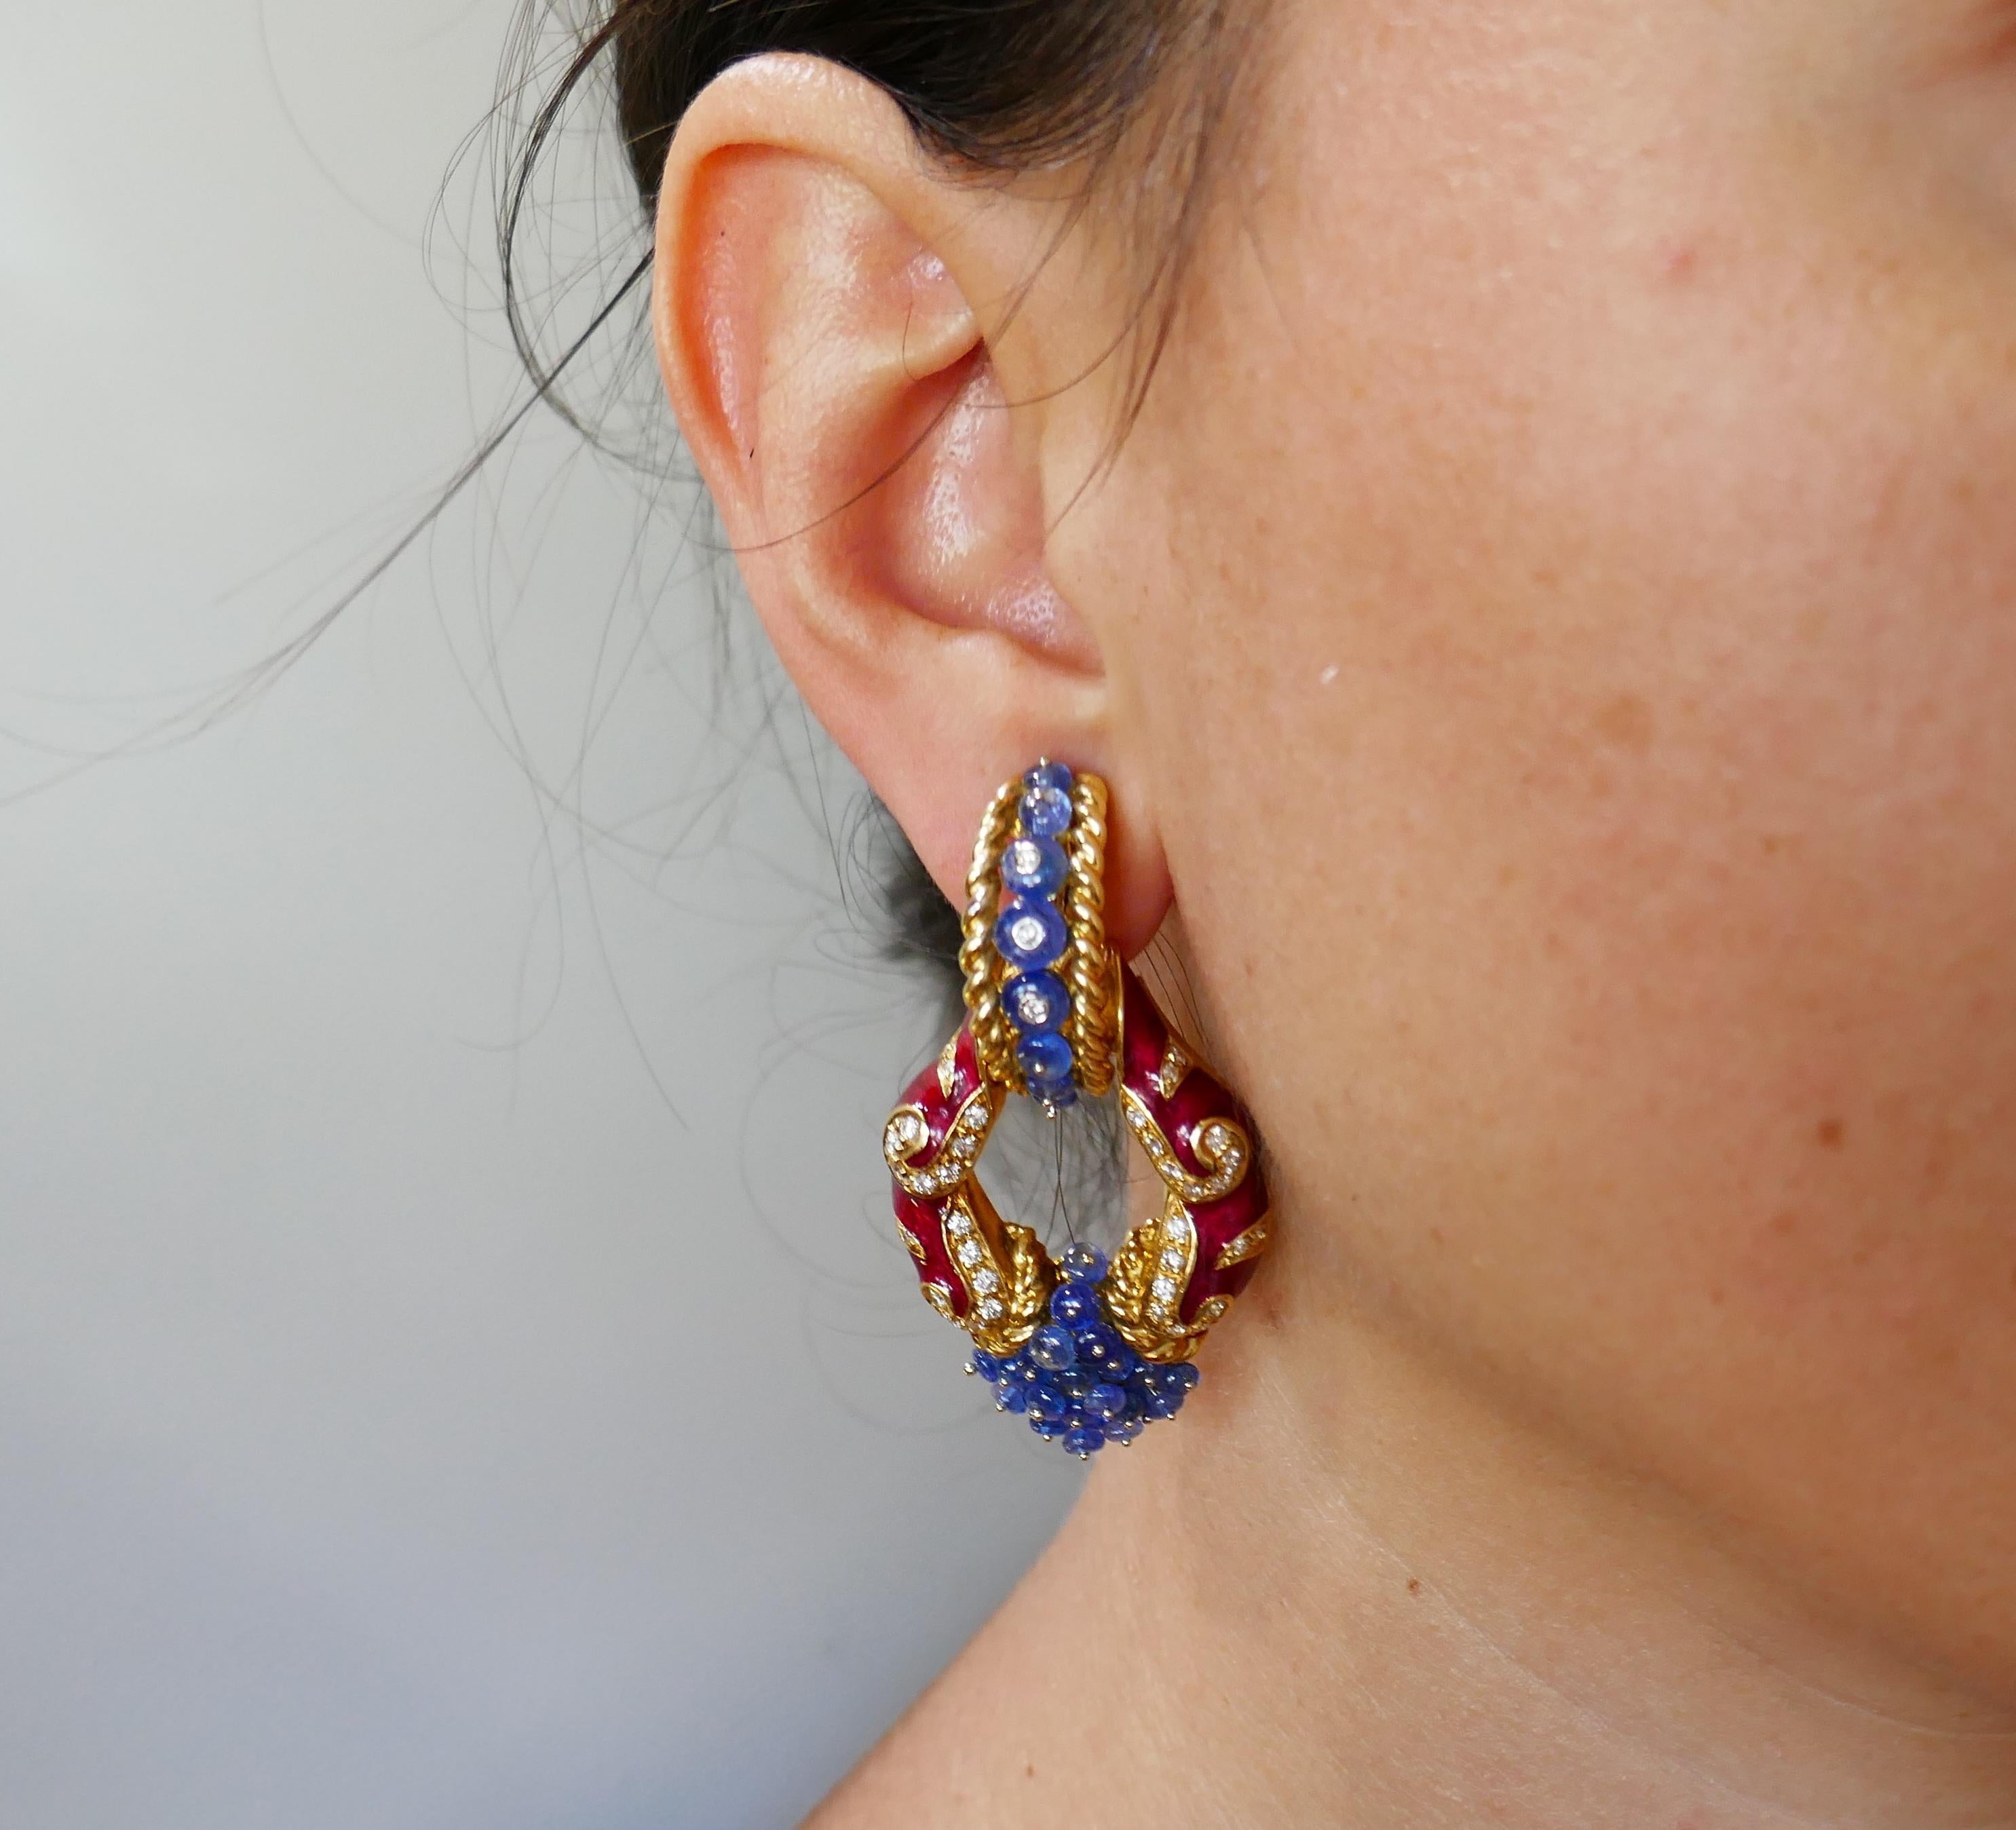 Bold and chic earrings created by Italian jewelry house Giovane. They definitely make a statement! The earrings are “Day & Night” and can be worn as drop earrings or you can remove the bottom parts and wear them as hoops. Versatile and wearable, the